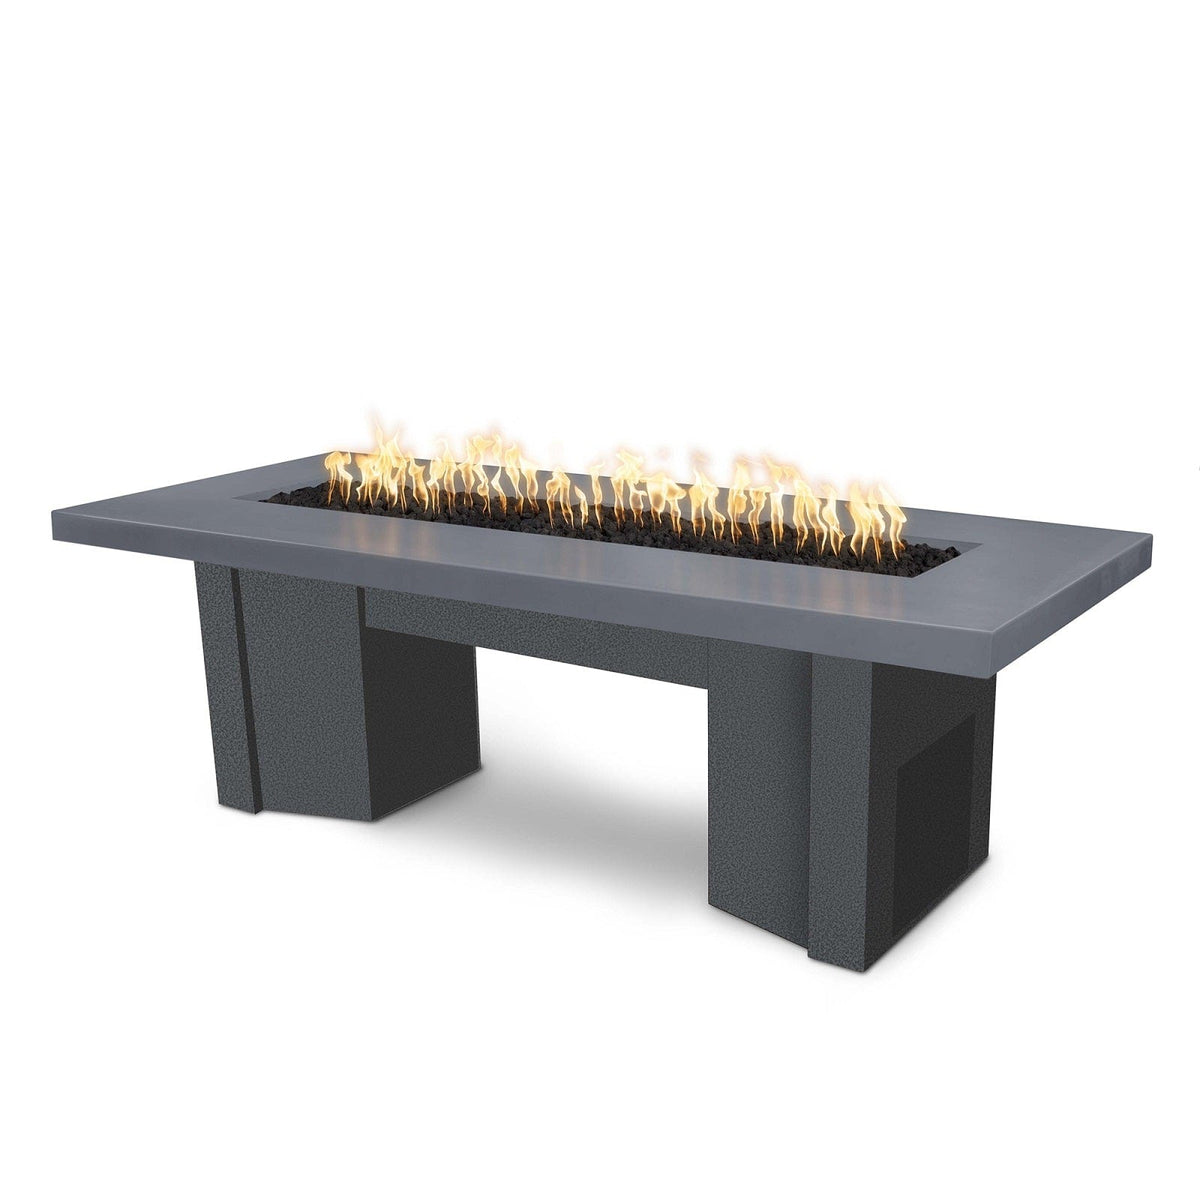 The Outdoor Plus Fire Features Gray (-GRY) / Silver Vein Powder Coated Steel (-SLV) The Outdoor Plus 78&quot; Alameda Fire Table Smooth Concrete in Liquid Propane - Flame Sense System with Push Button Spark Igniter / OPT-ALMGFRC78FSEN-LP